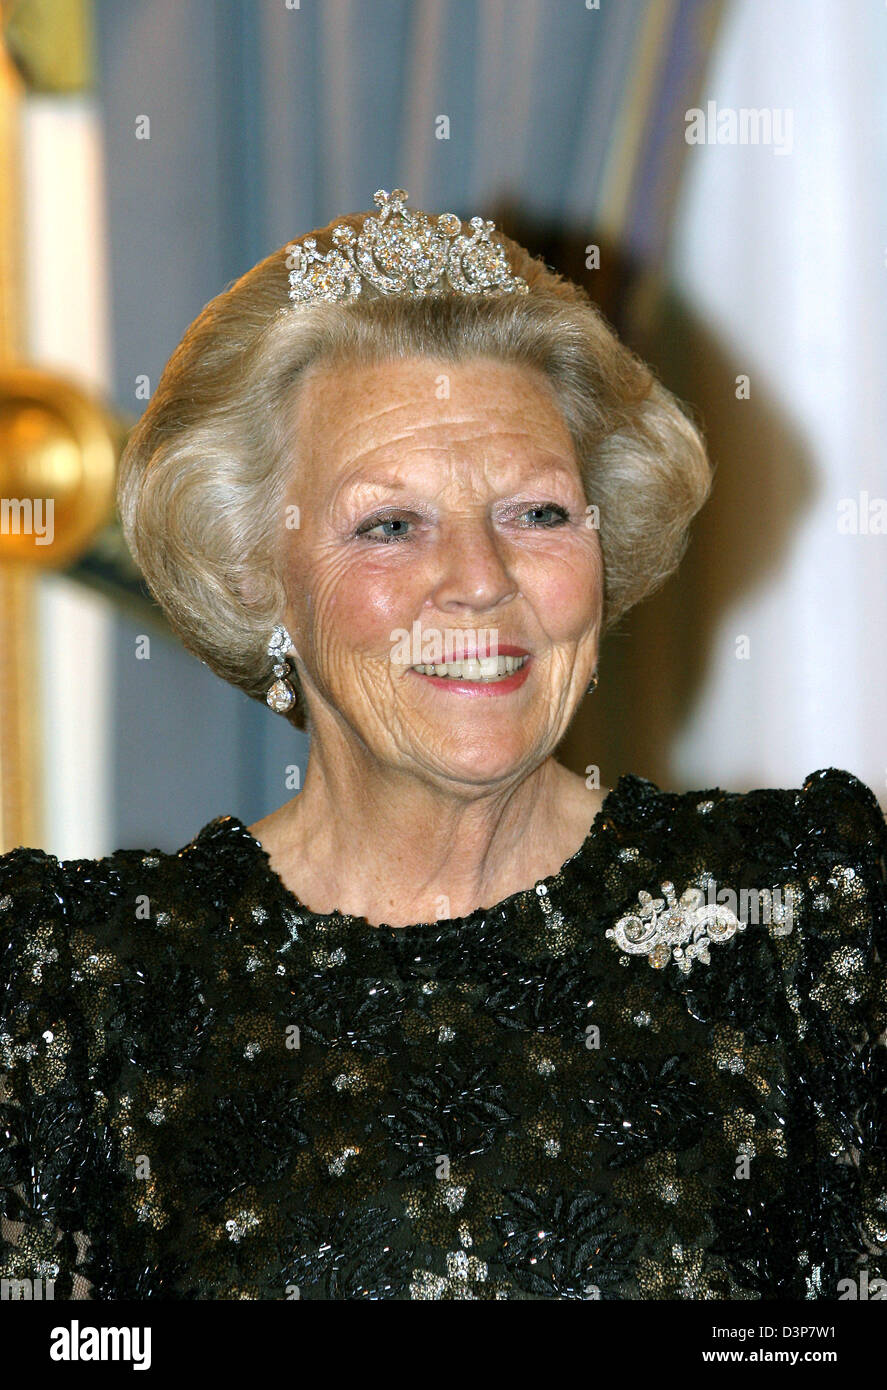 Queen Beatrix of the Netherlands is pictured during a reception for general governor of Australia Michael Jeffrey and his wife Marlena Jeffery in The Hague, Netherlands, Tuesday, 26 September 2006. Photo: RoyalPress (NETHERLANDS OUT) Stock Photo